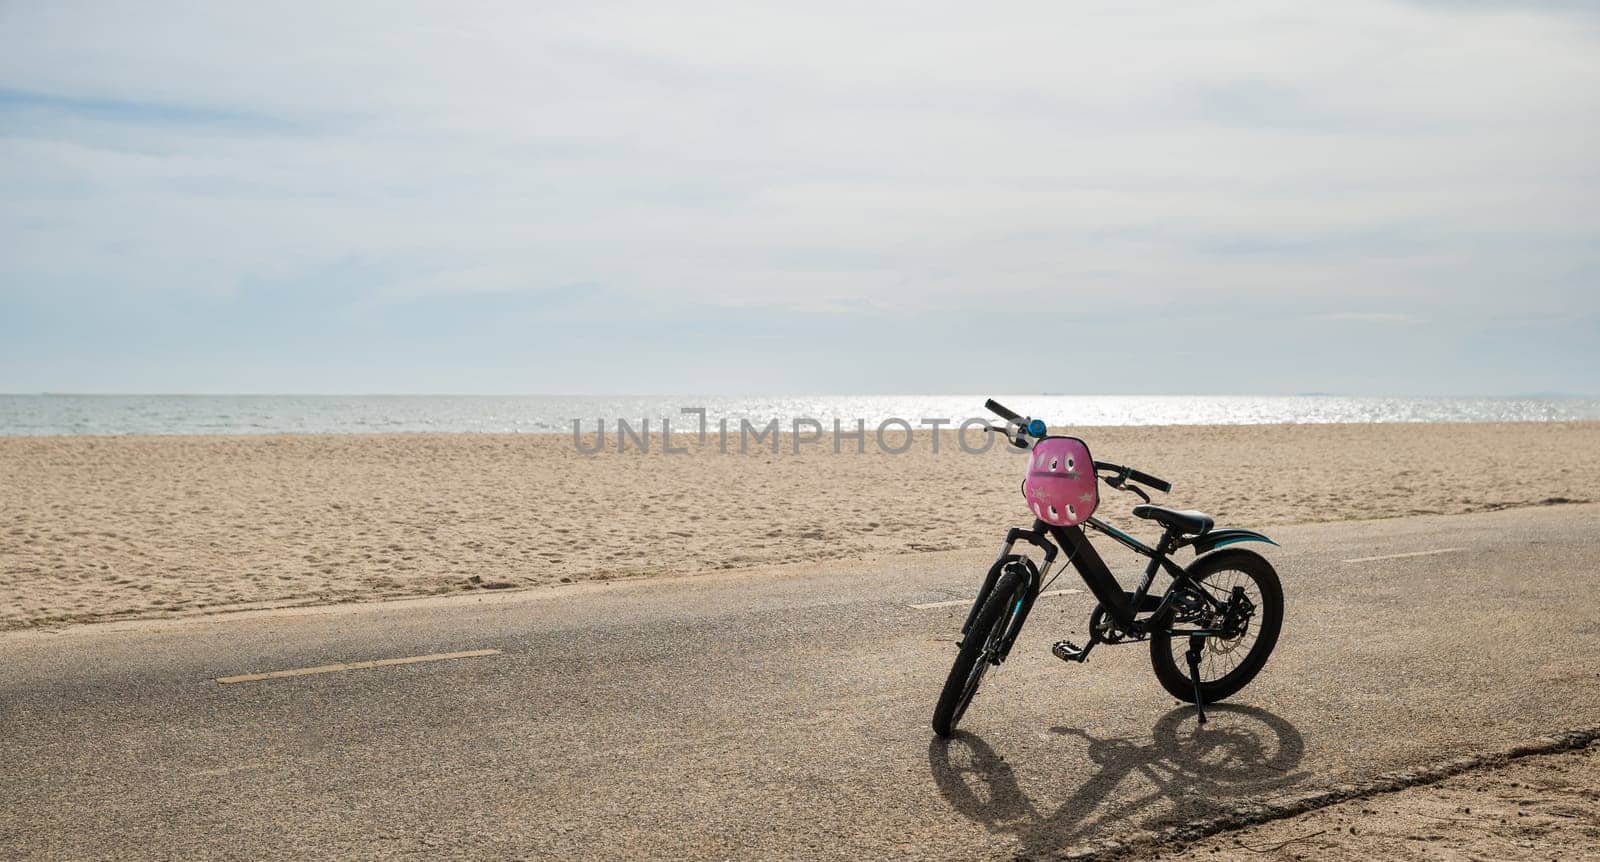 Seascape serenity, A child bicycle rests peacefully on the sandy beach creating a perfect image of leisurely tourism day in North California sun during the summer season. bike in summertime vacations